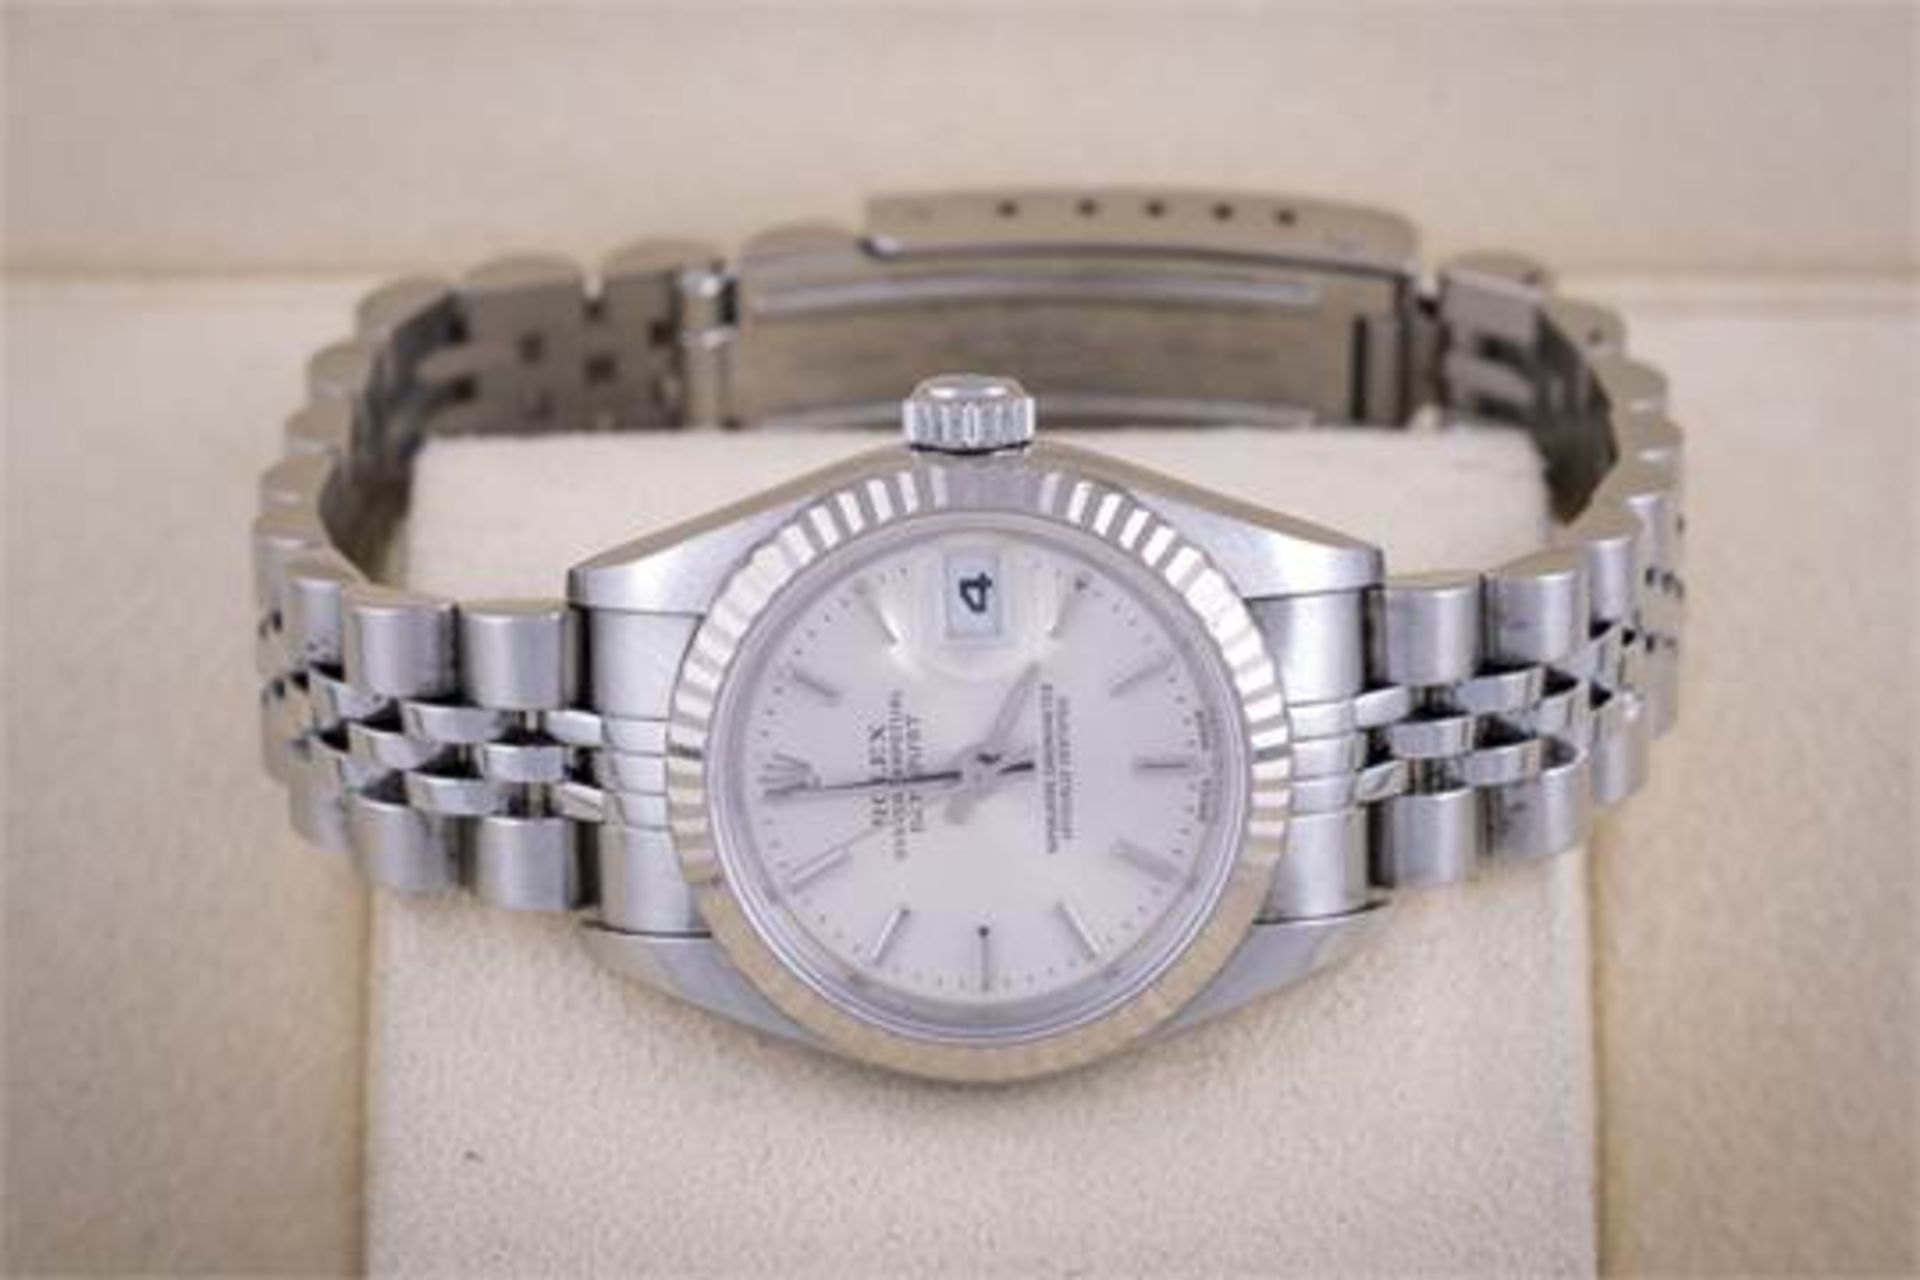 LADIES ROLEX DATEJUST, FULL STAINLESS STEEL, JUBILEE STRAP, SET WITH FLUTED BEZEL, WITH BOX AND